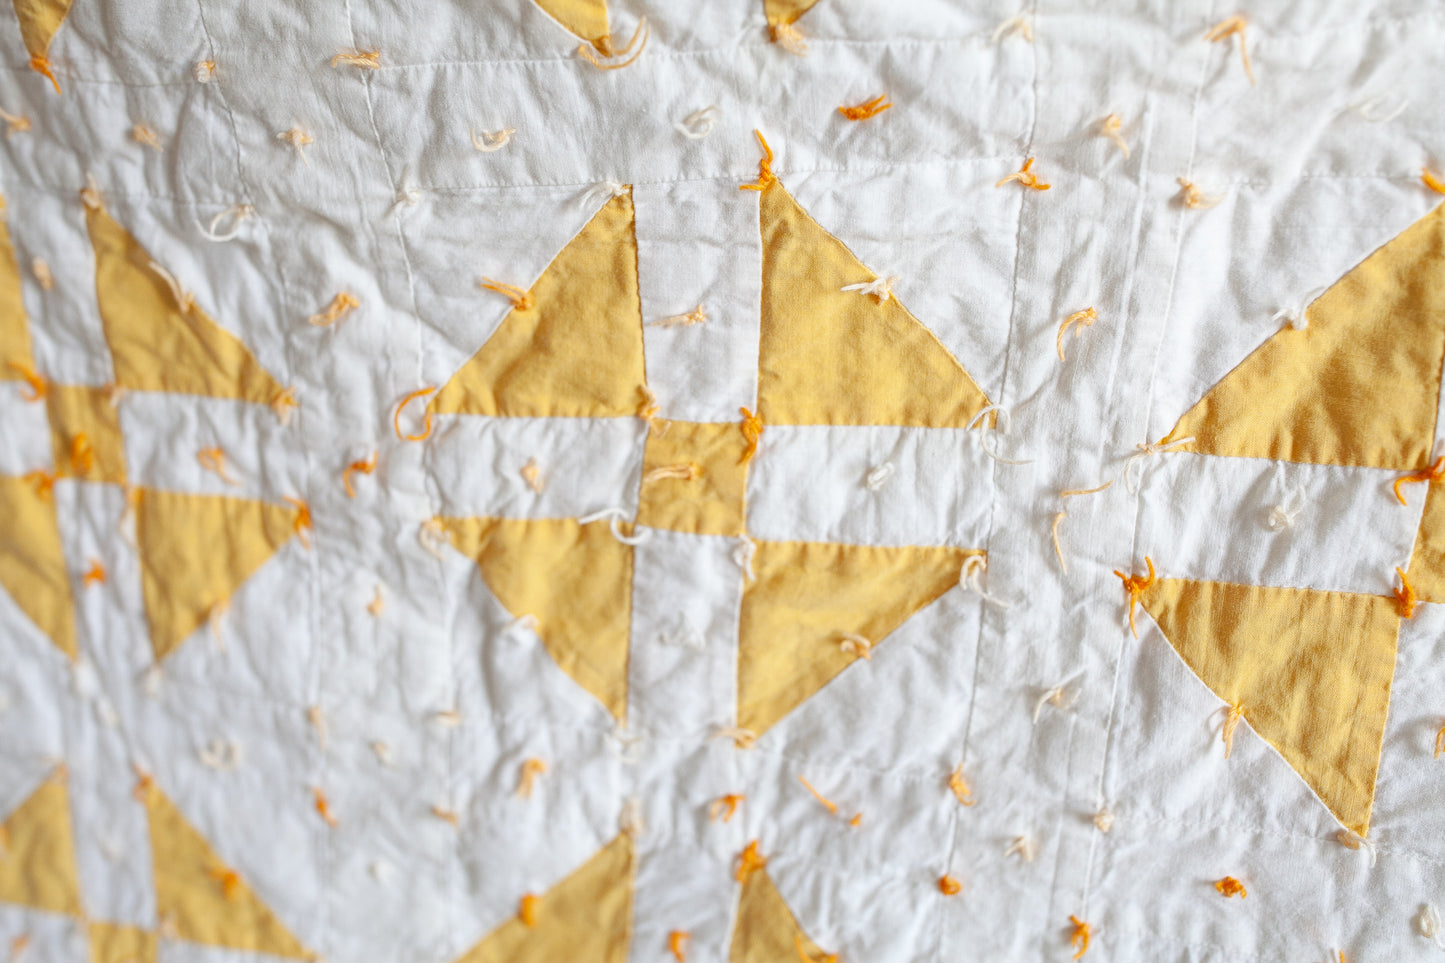 Vintage Quilt - Yellow and White Quilt